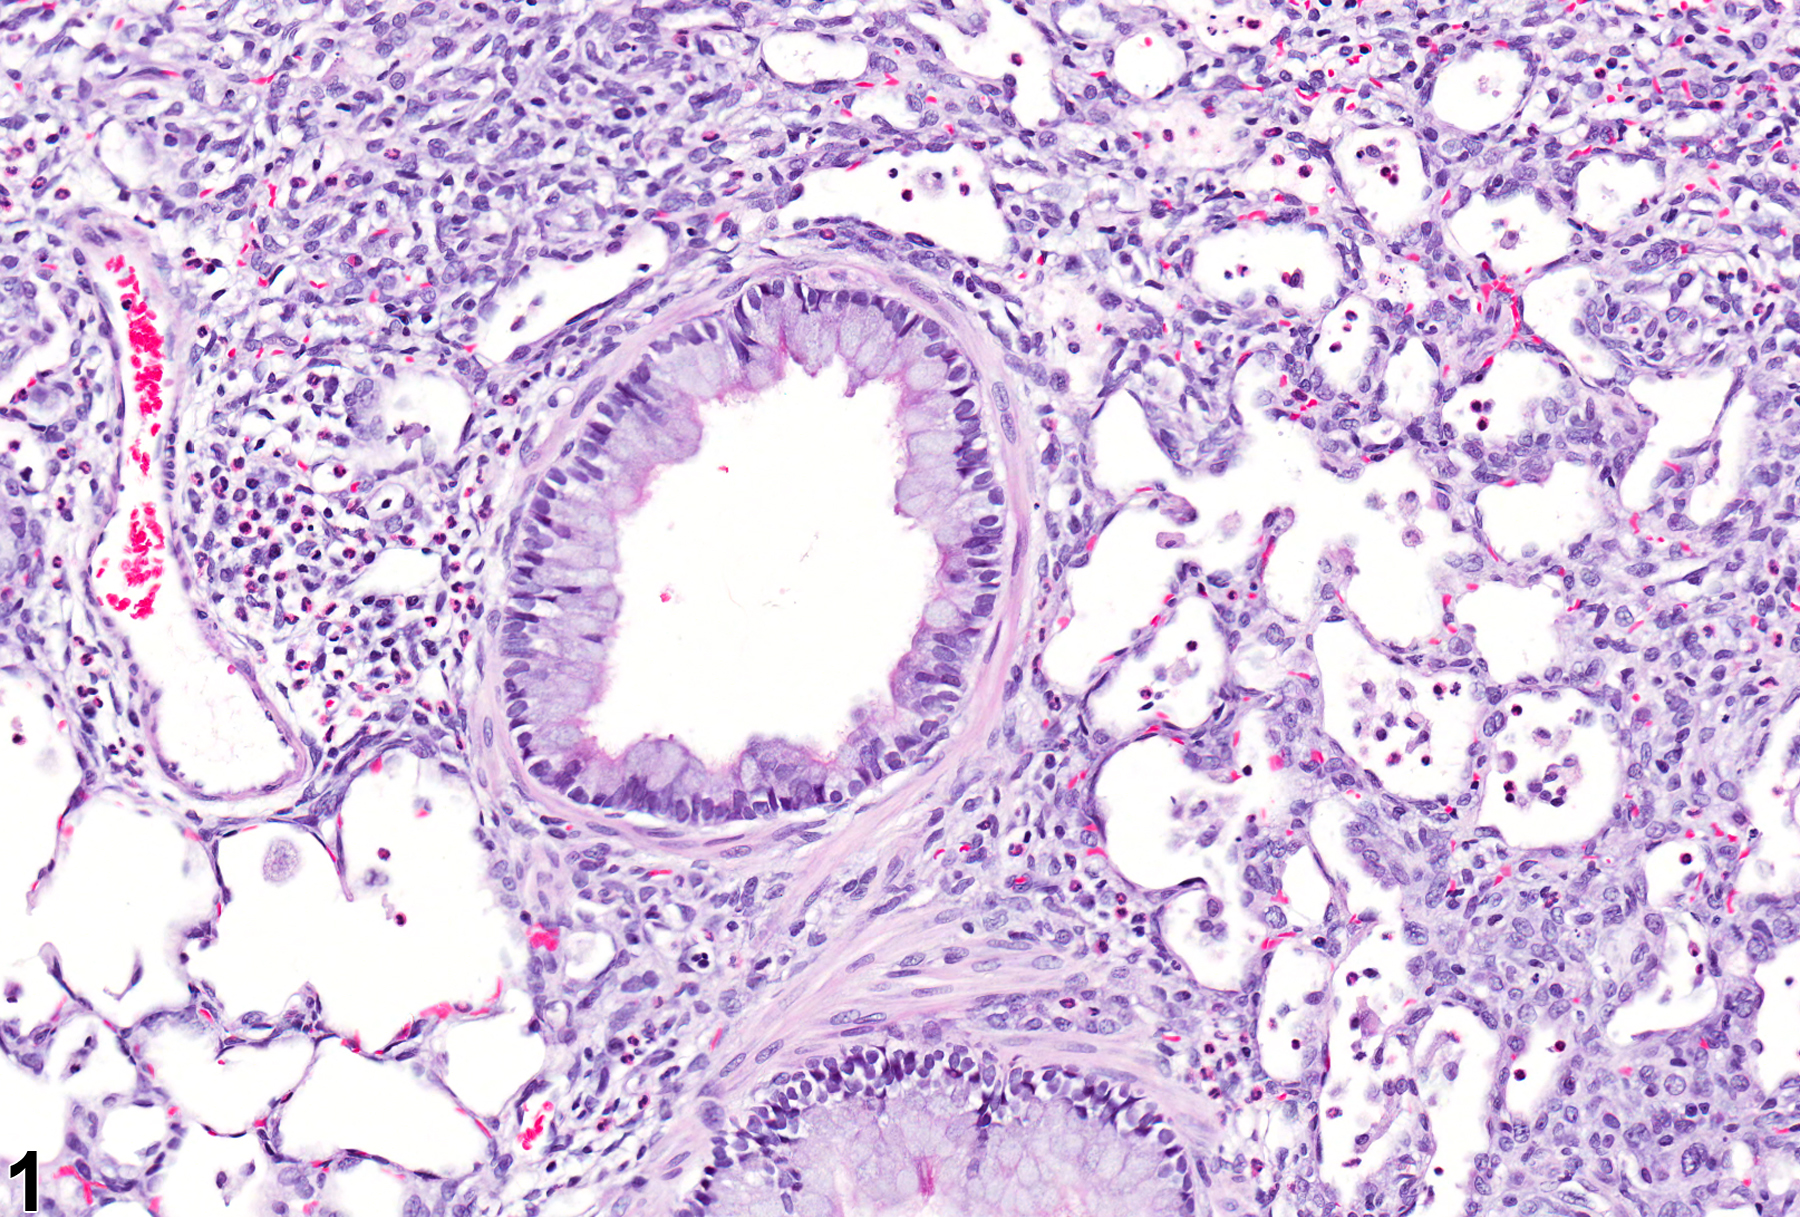 Image of bronchiolar goblet cell metaplasia in the lung from a male Sprague-Dawley rat in a acute study